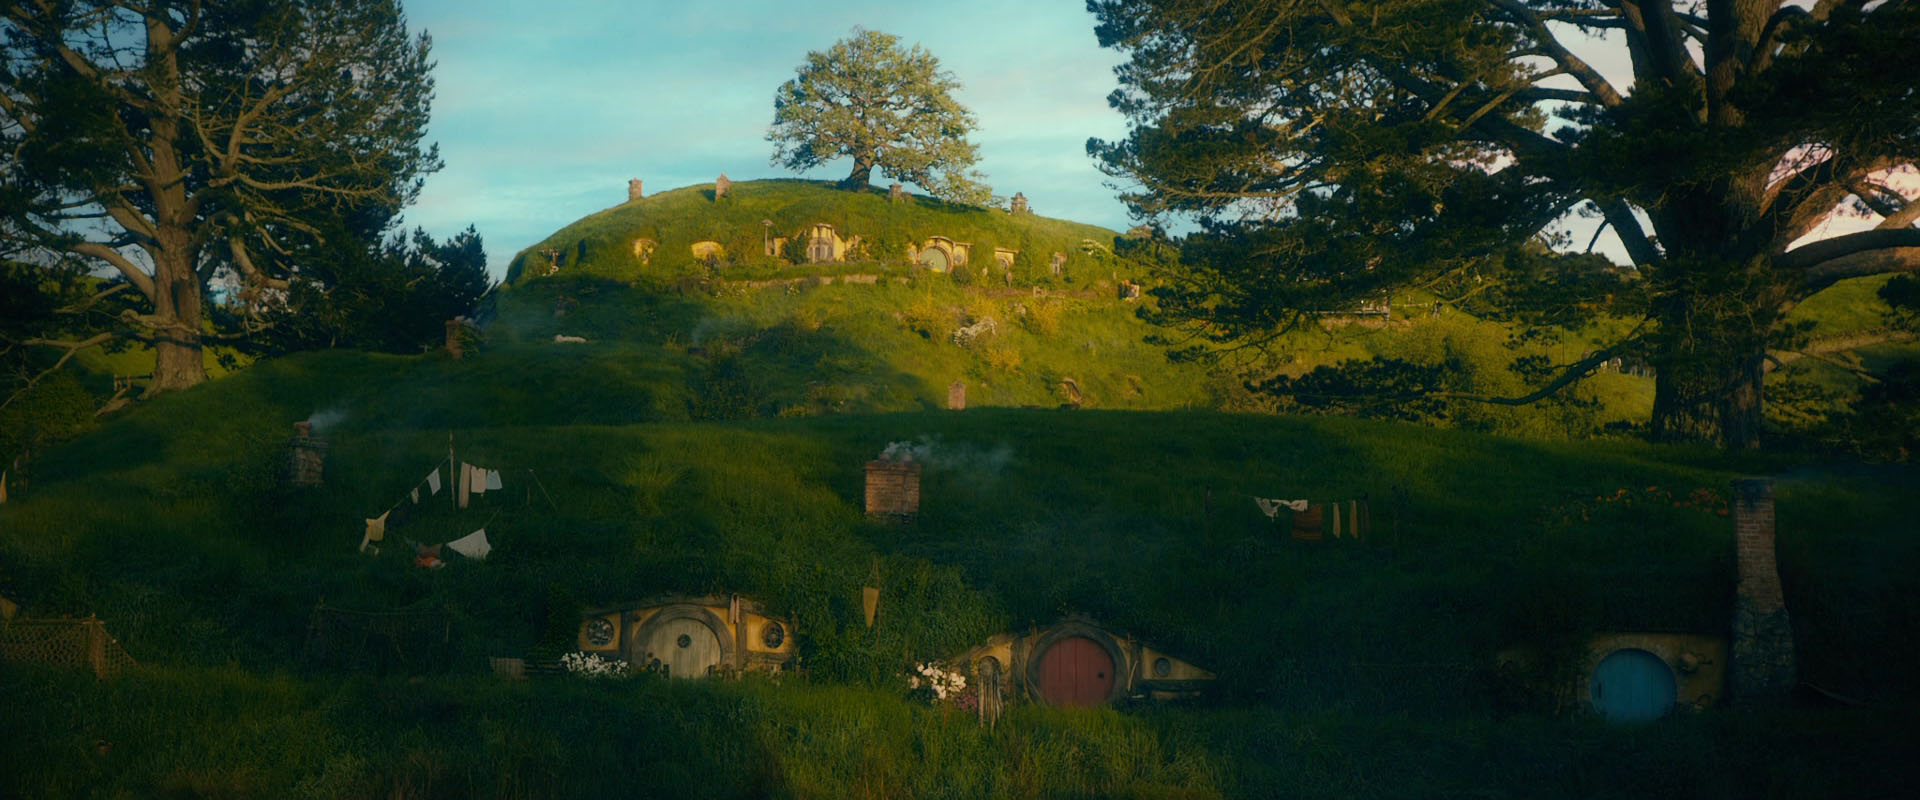 The shire 1080P 2K 4K 5K HD wallpapers free download  Wallpaper Flare